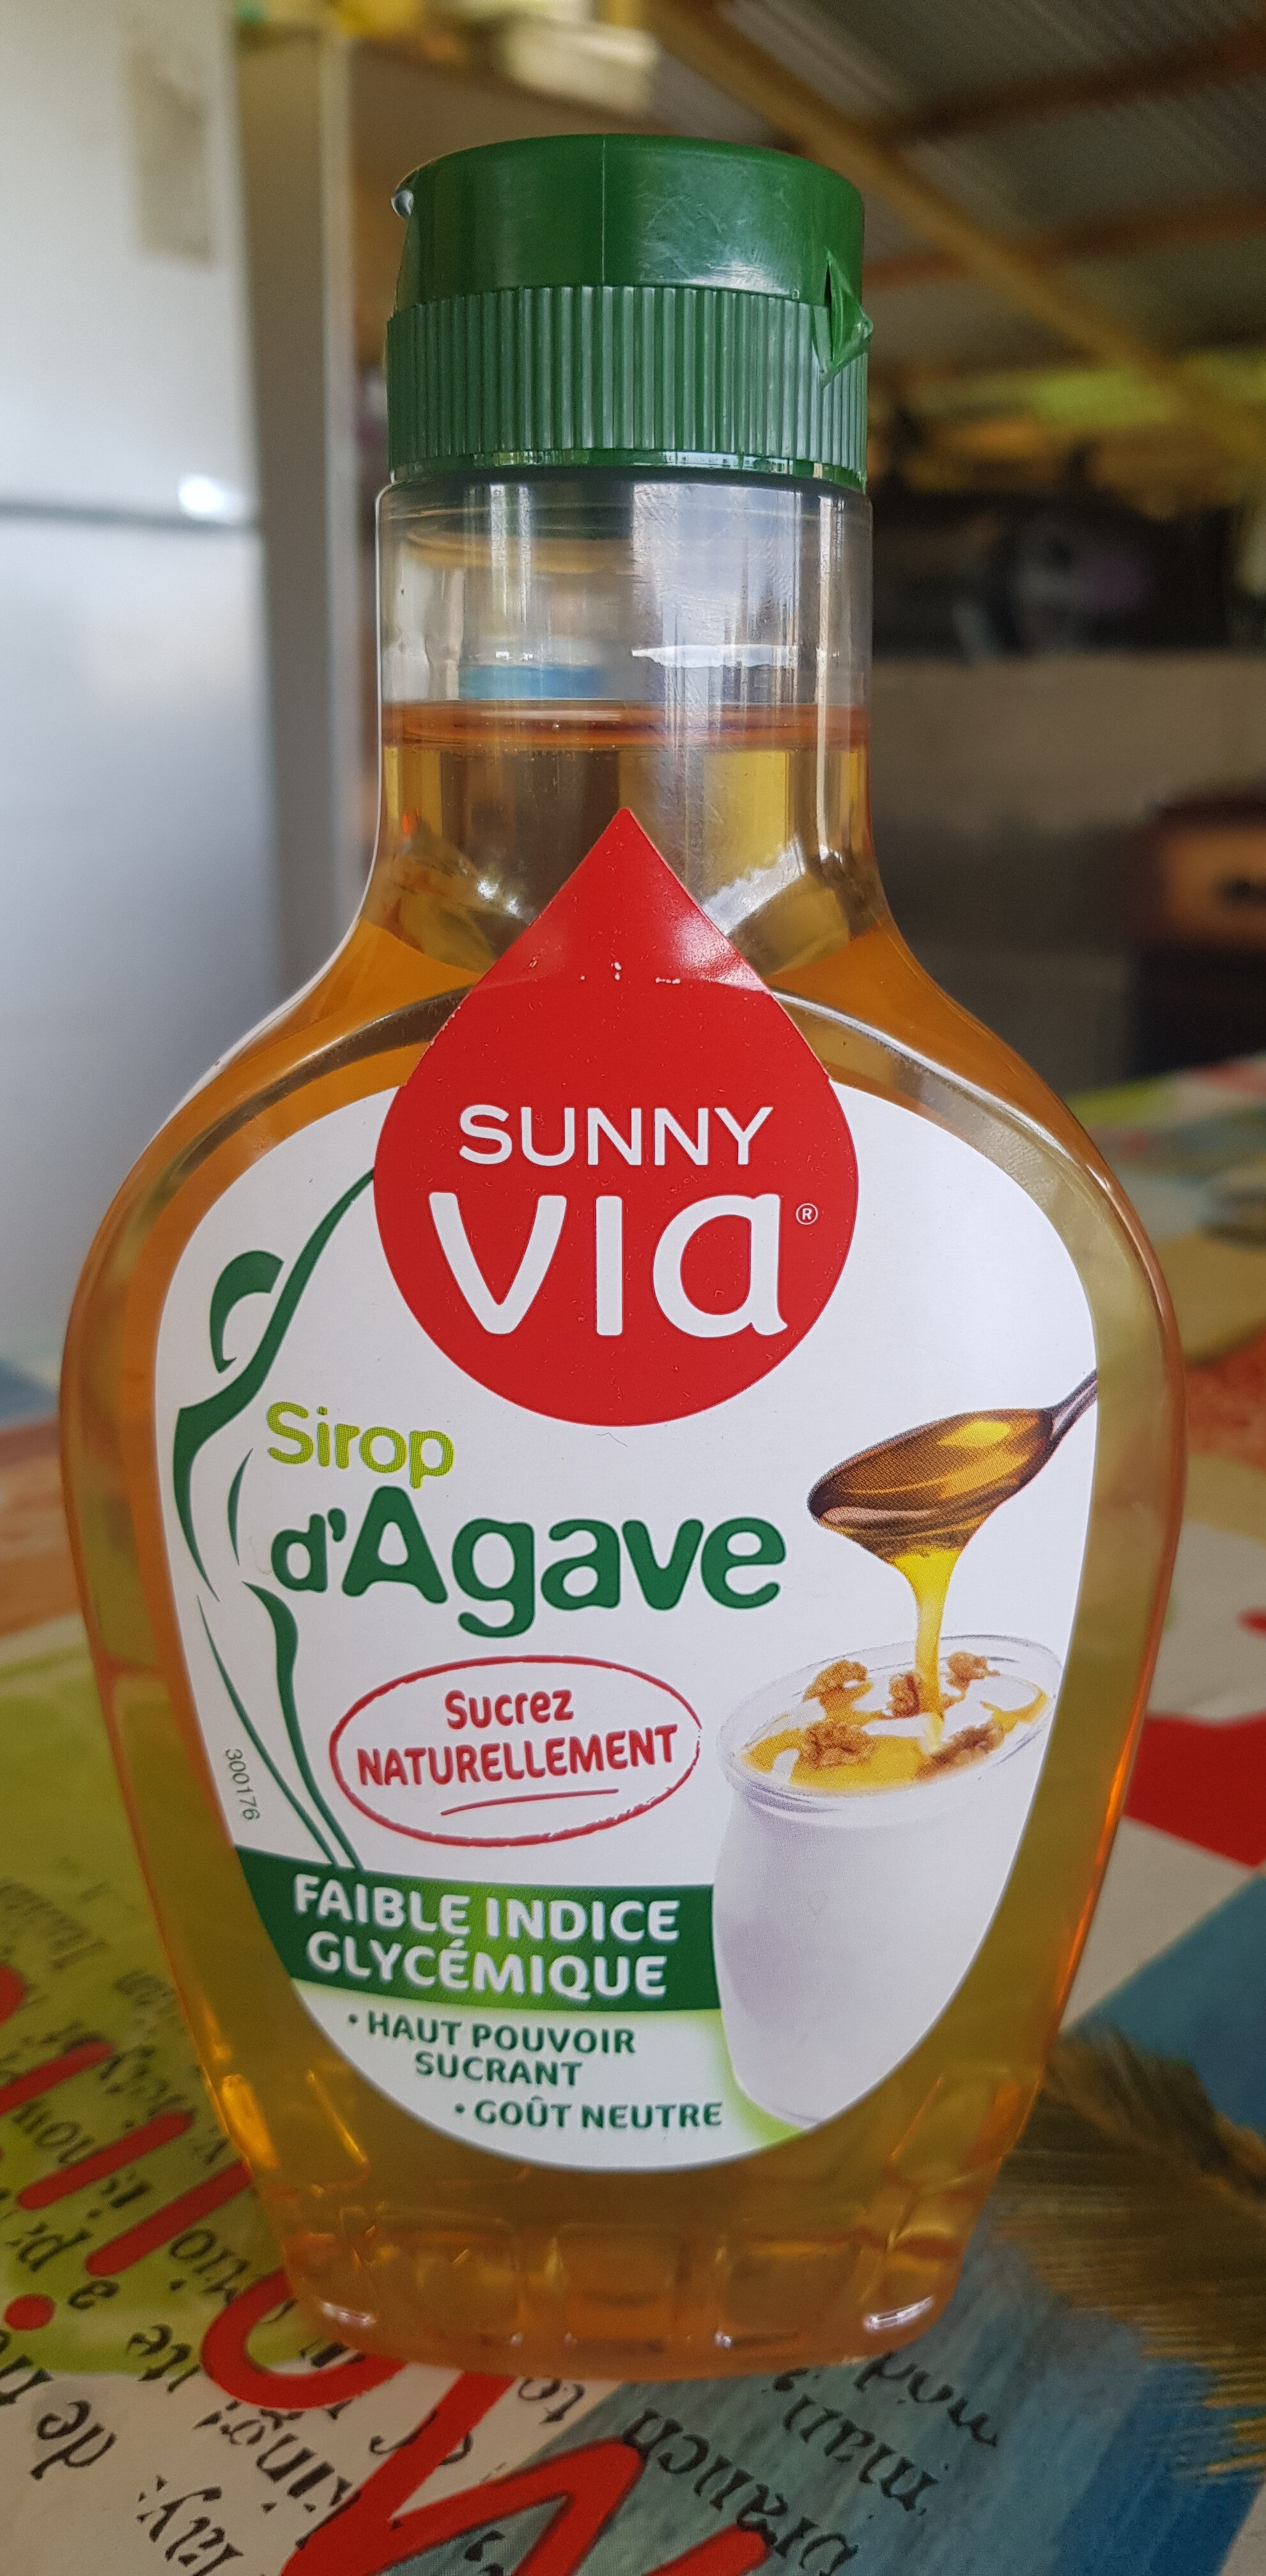 SIROP D'AGAVE 350g - Prodotto - fr